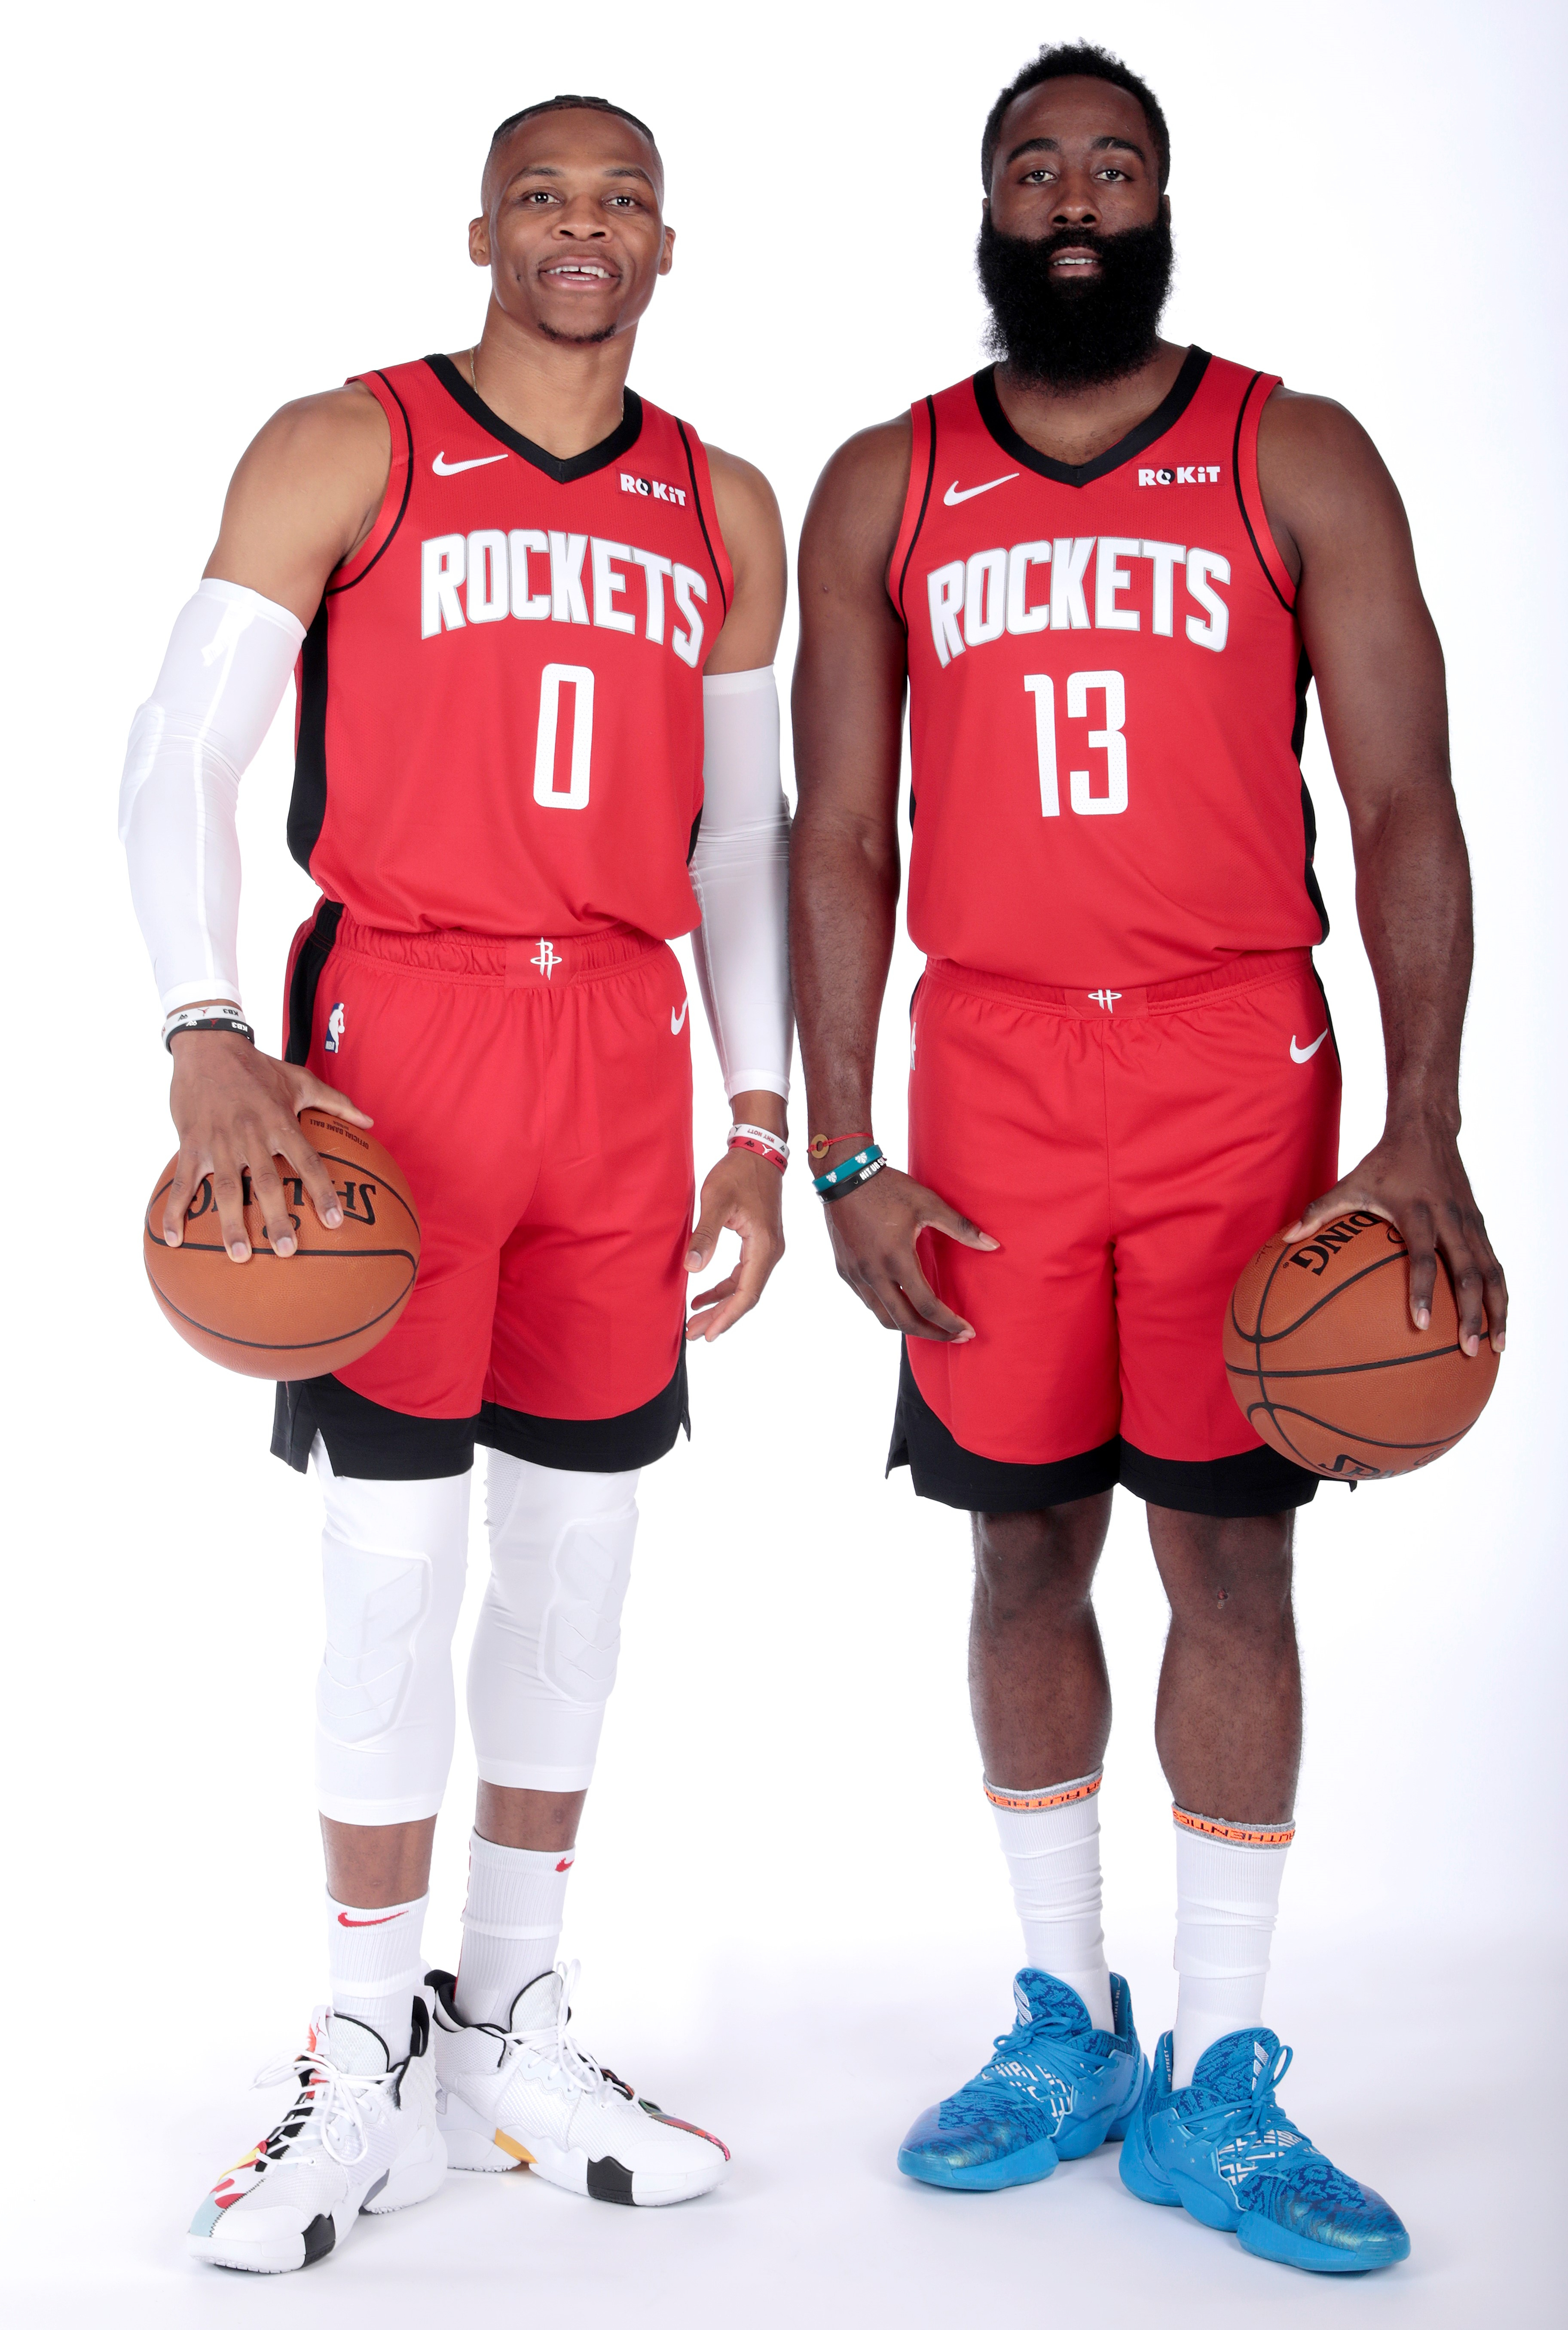 Russell Westbrook (L) and James Harden (R) of the Houston Rockets pose to t...